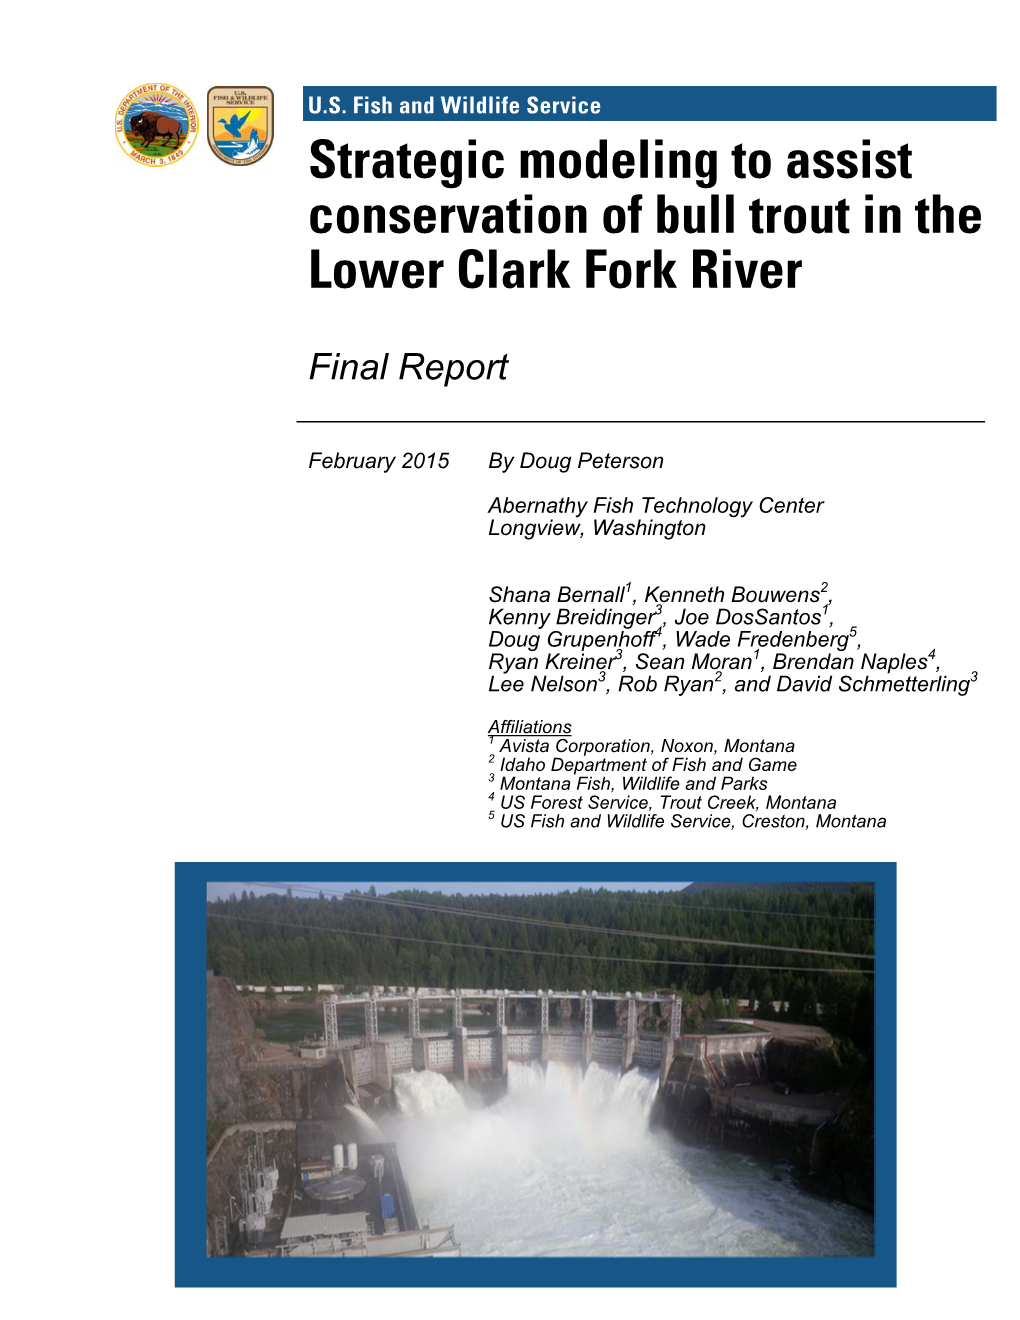 Strategic Modeling to Assist Conservation of Bull Trout in the Lower Clark Fork River